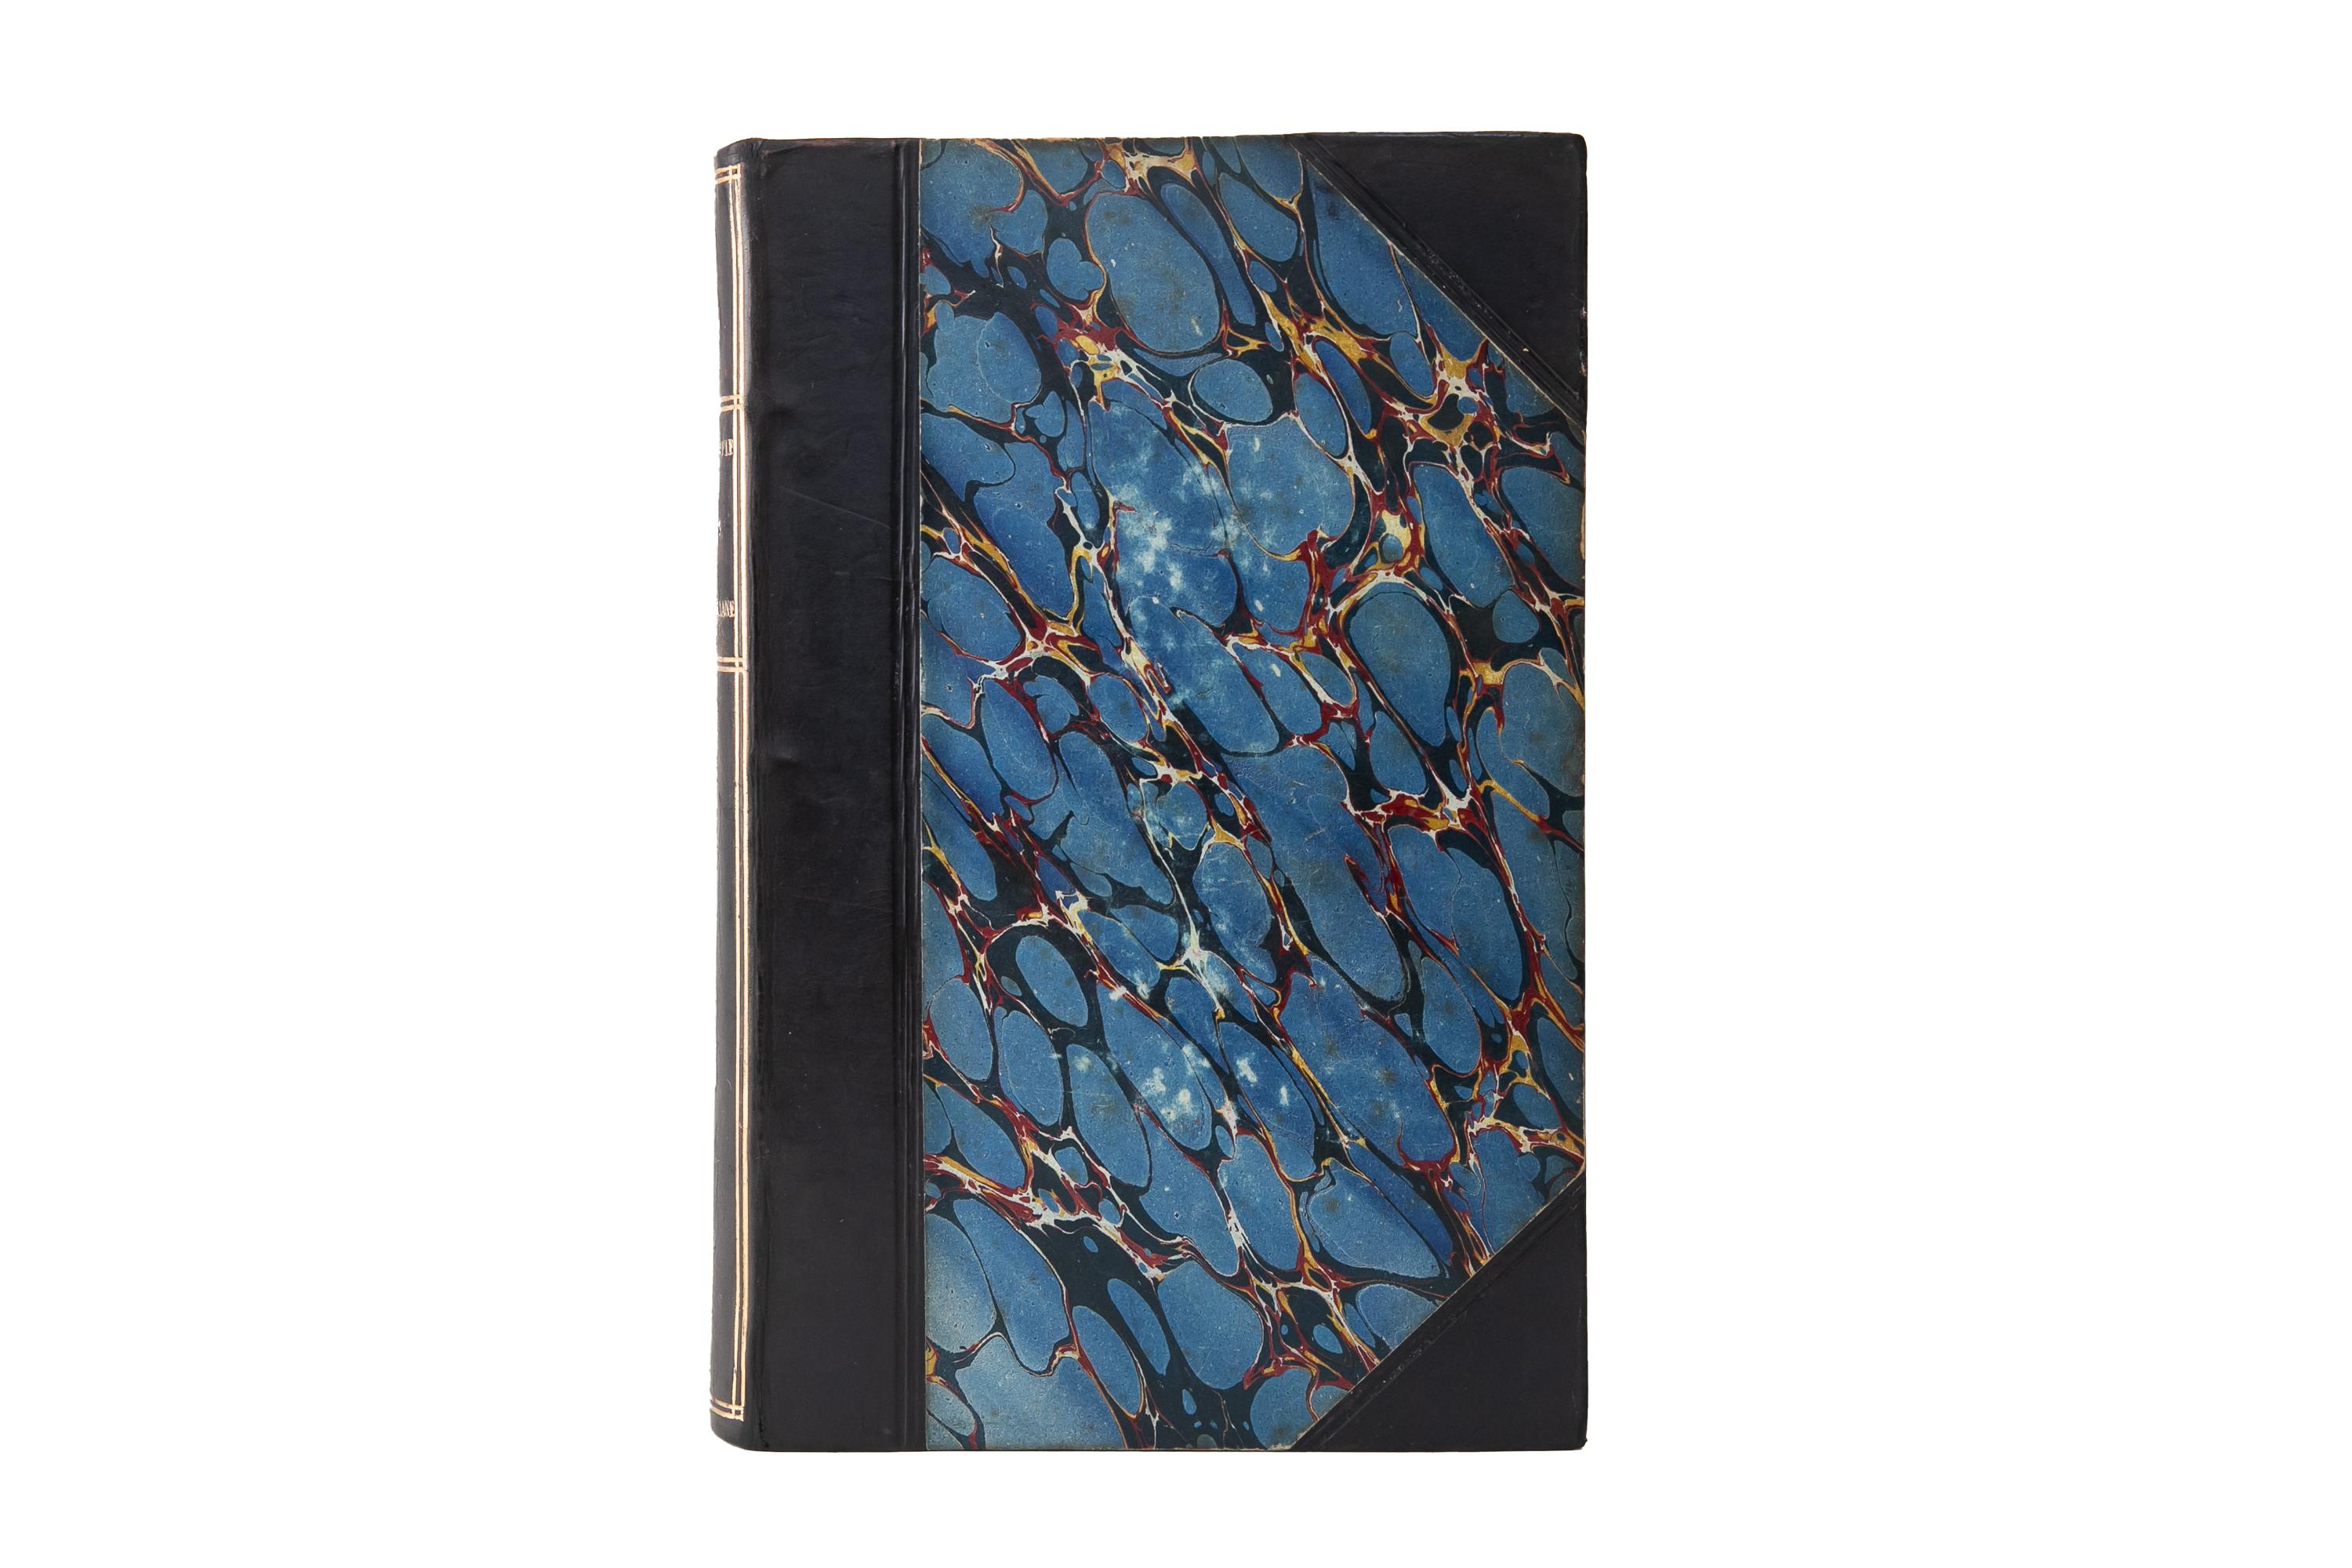 2 Volumes. Charles Macfarlane, Constantinople. Second Edition. Bound in 3/4 navy calf and marbled boards with the covers and spines displaying open and gilt-tooled detailing. All of the edges are marbled with marbled endpapers. Includes